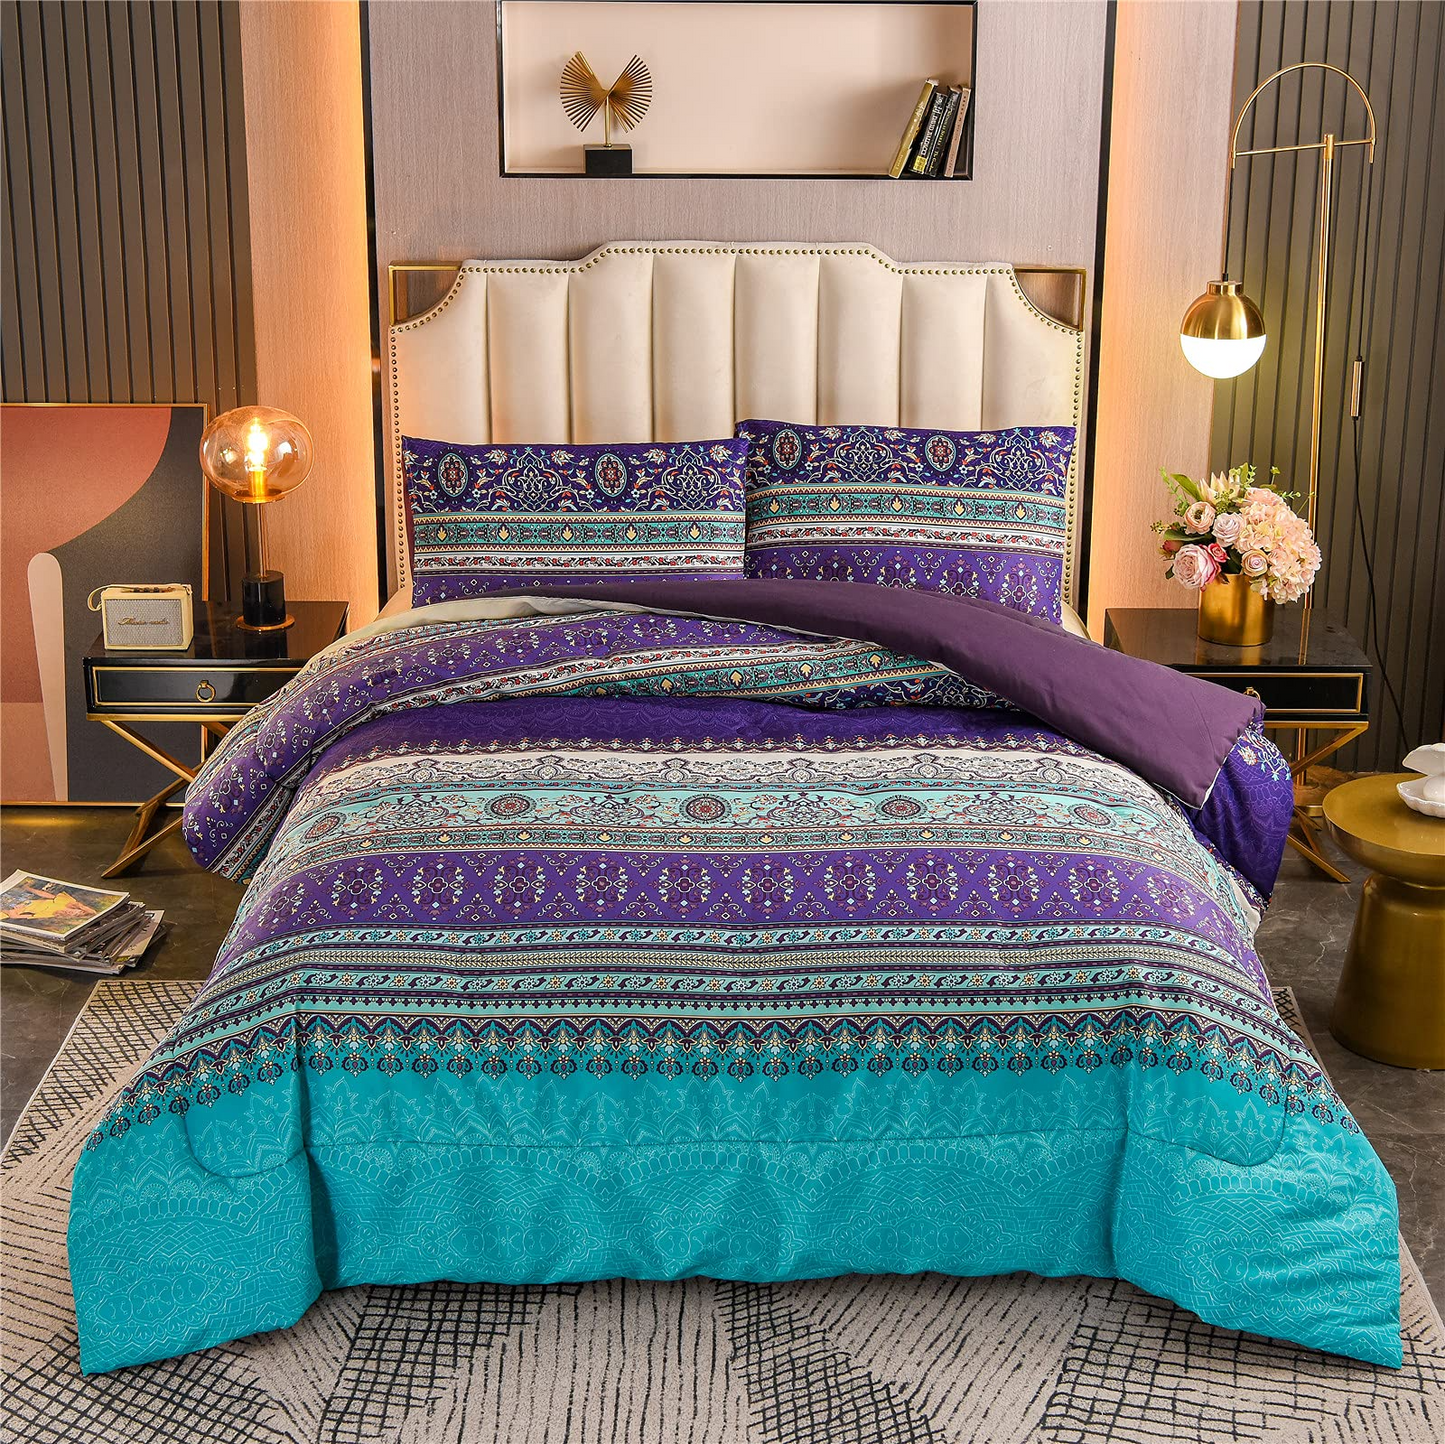 WONGS BEDDING Bohemian Style Comforter Set With 2 Pillow Cases